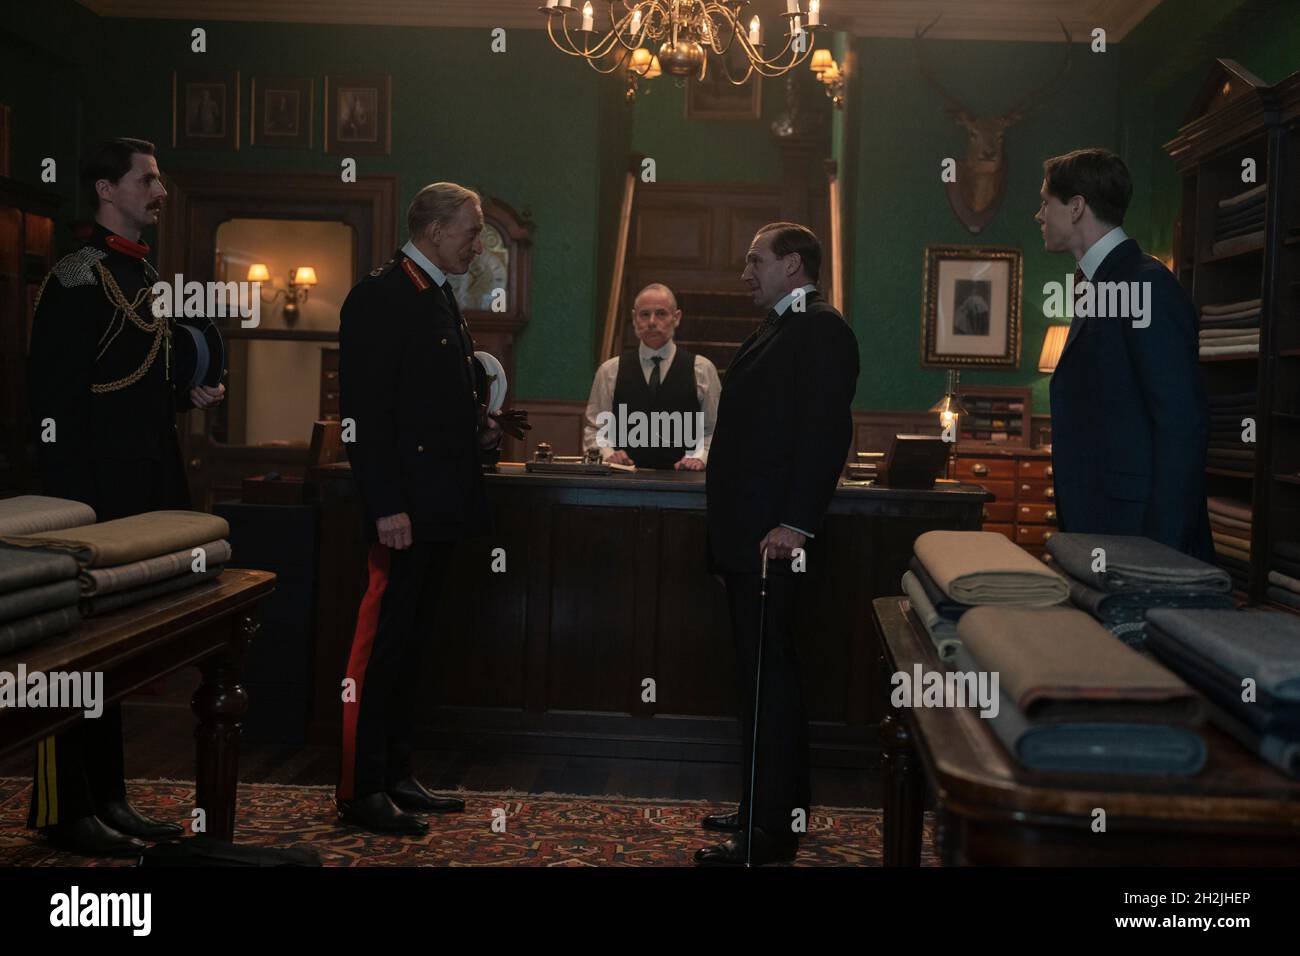 (L-R) Matthew Goode as Morton, Charles Dance as Kitchener, Shaun Scott as Kingsman Tailor, Ralph Fiennes as Oxford and Harris Dickinson as Conrad in 20th Century Studios’ THE KING’S MAN. Photo credit: Peter Mountain / 20th Century Studios / The Hollywood Archive Stock Photo